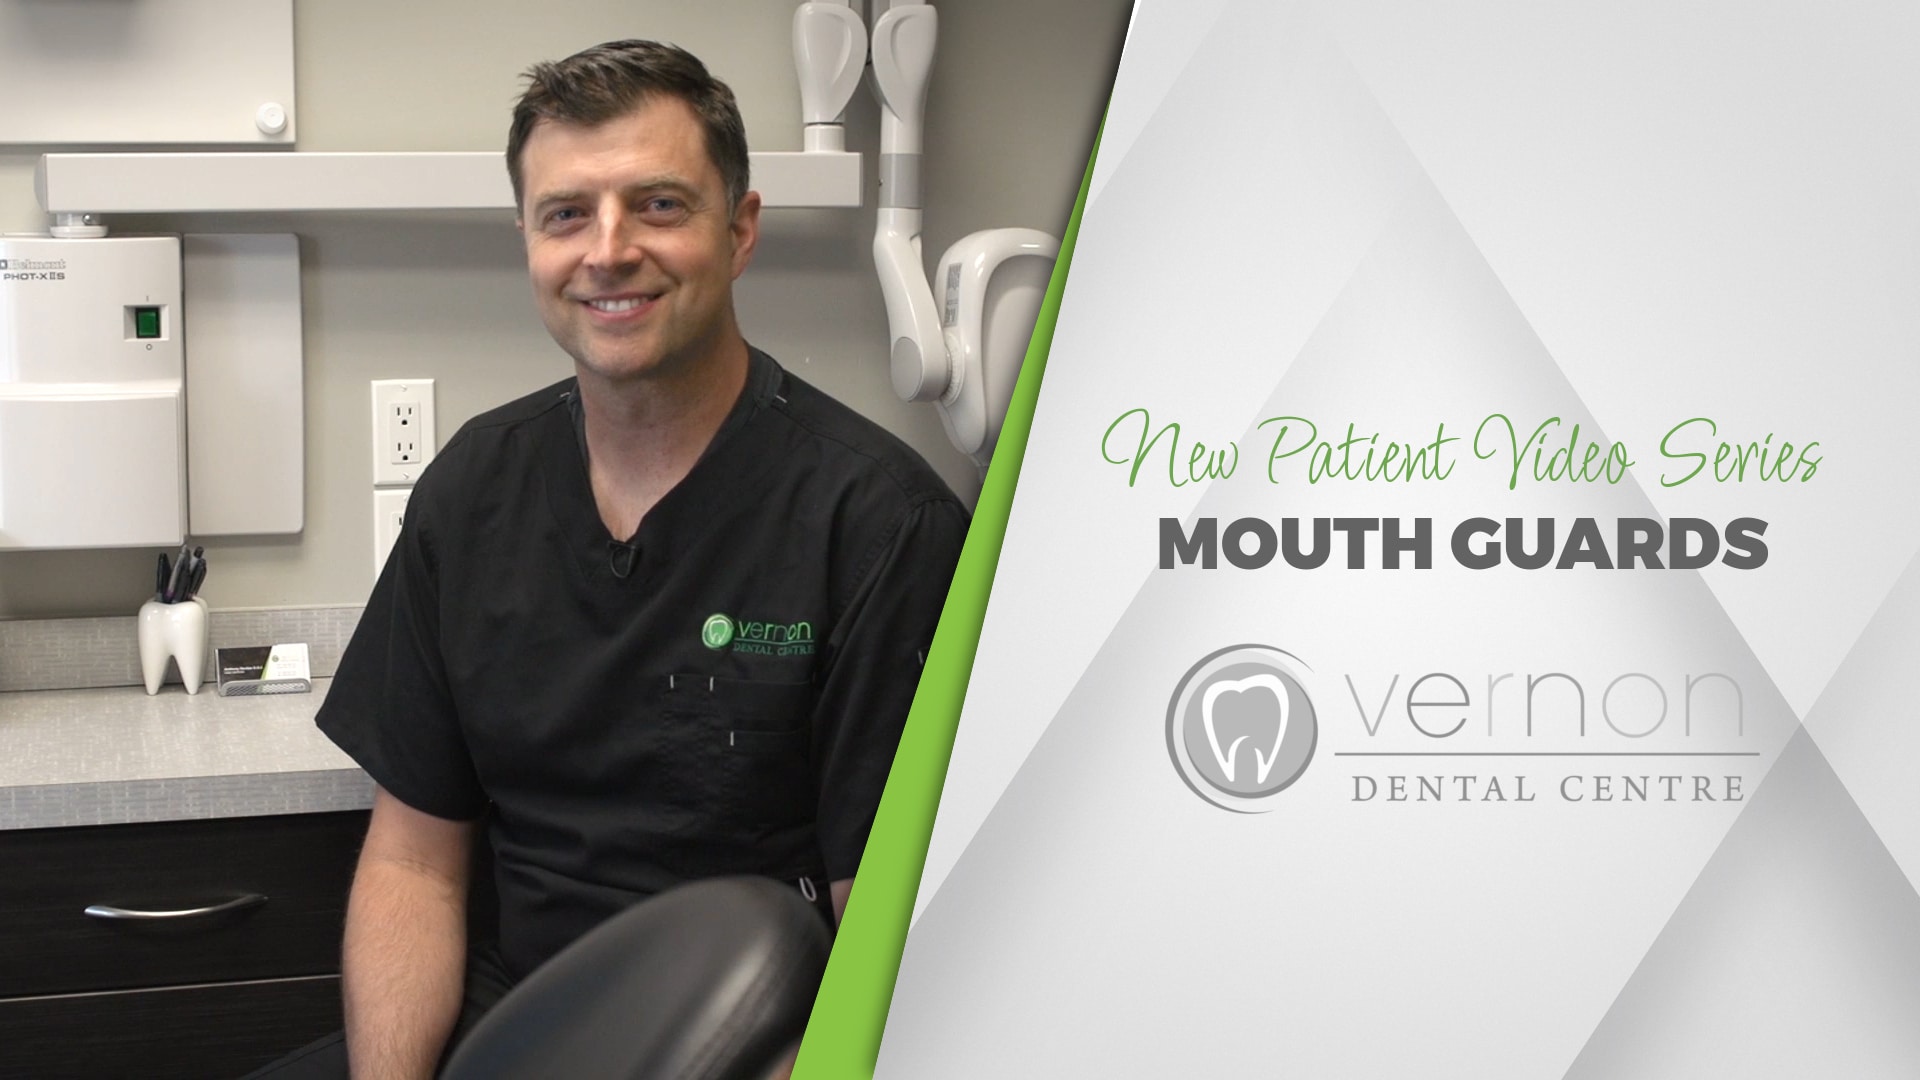 Dr. Anthony Berdan from the Vernon Dental Centre discusses mouth guards